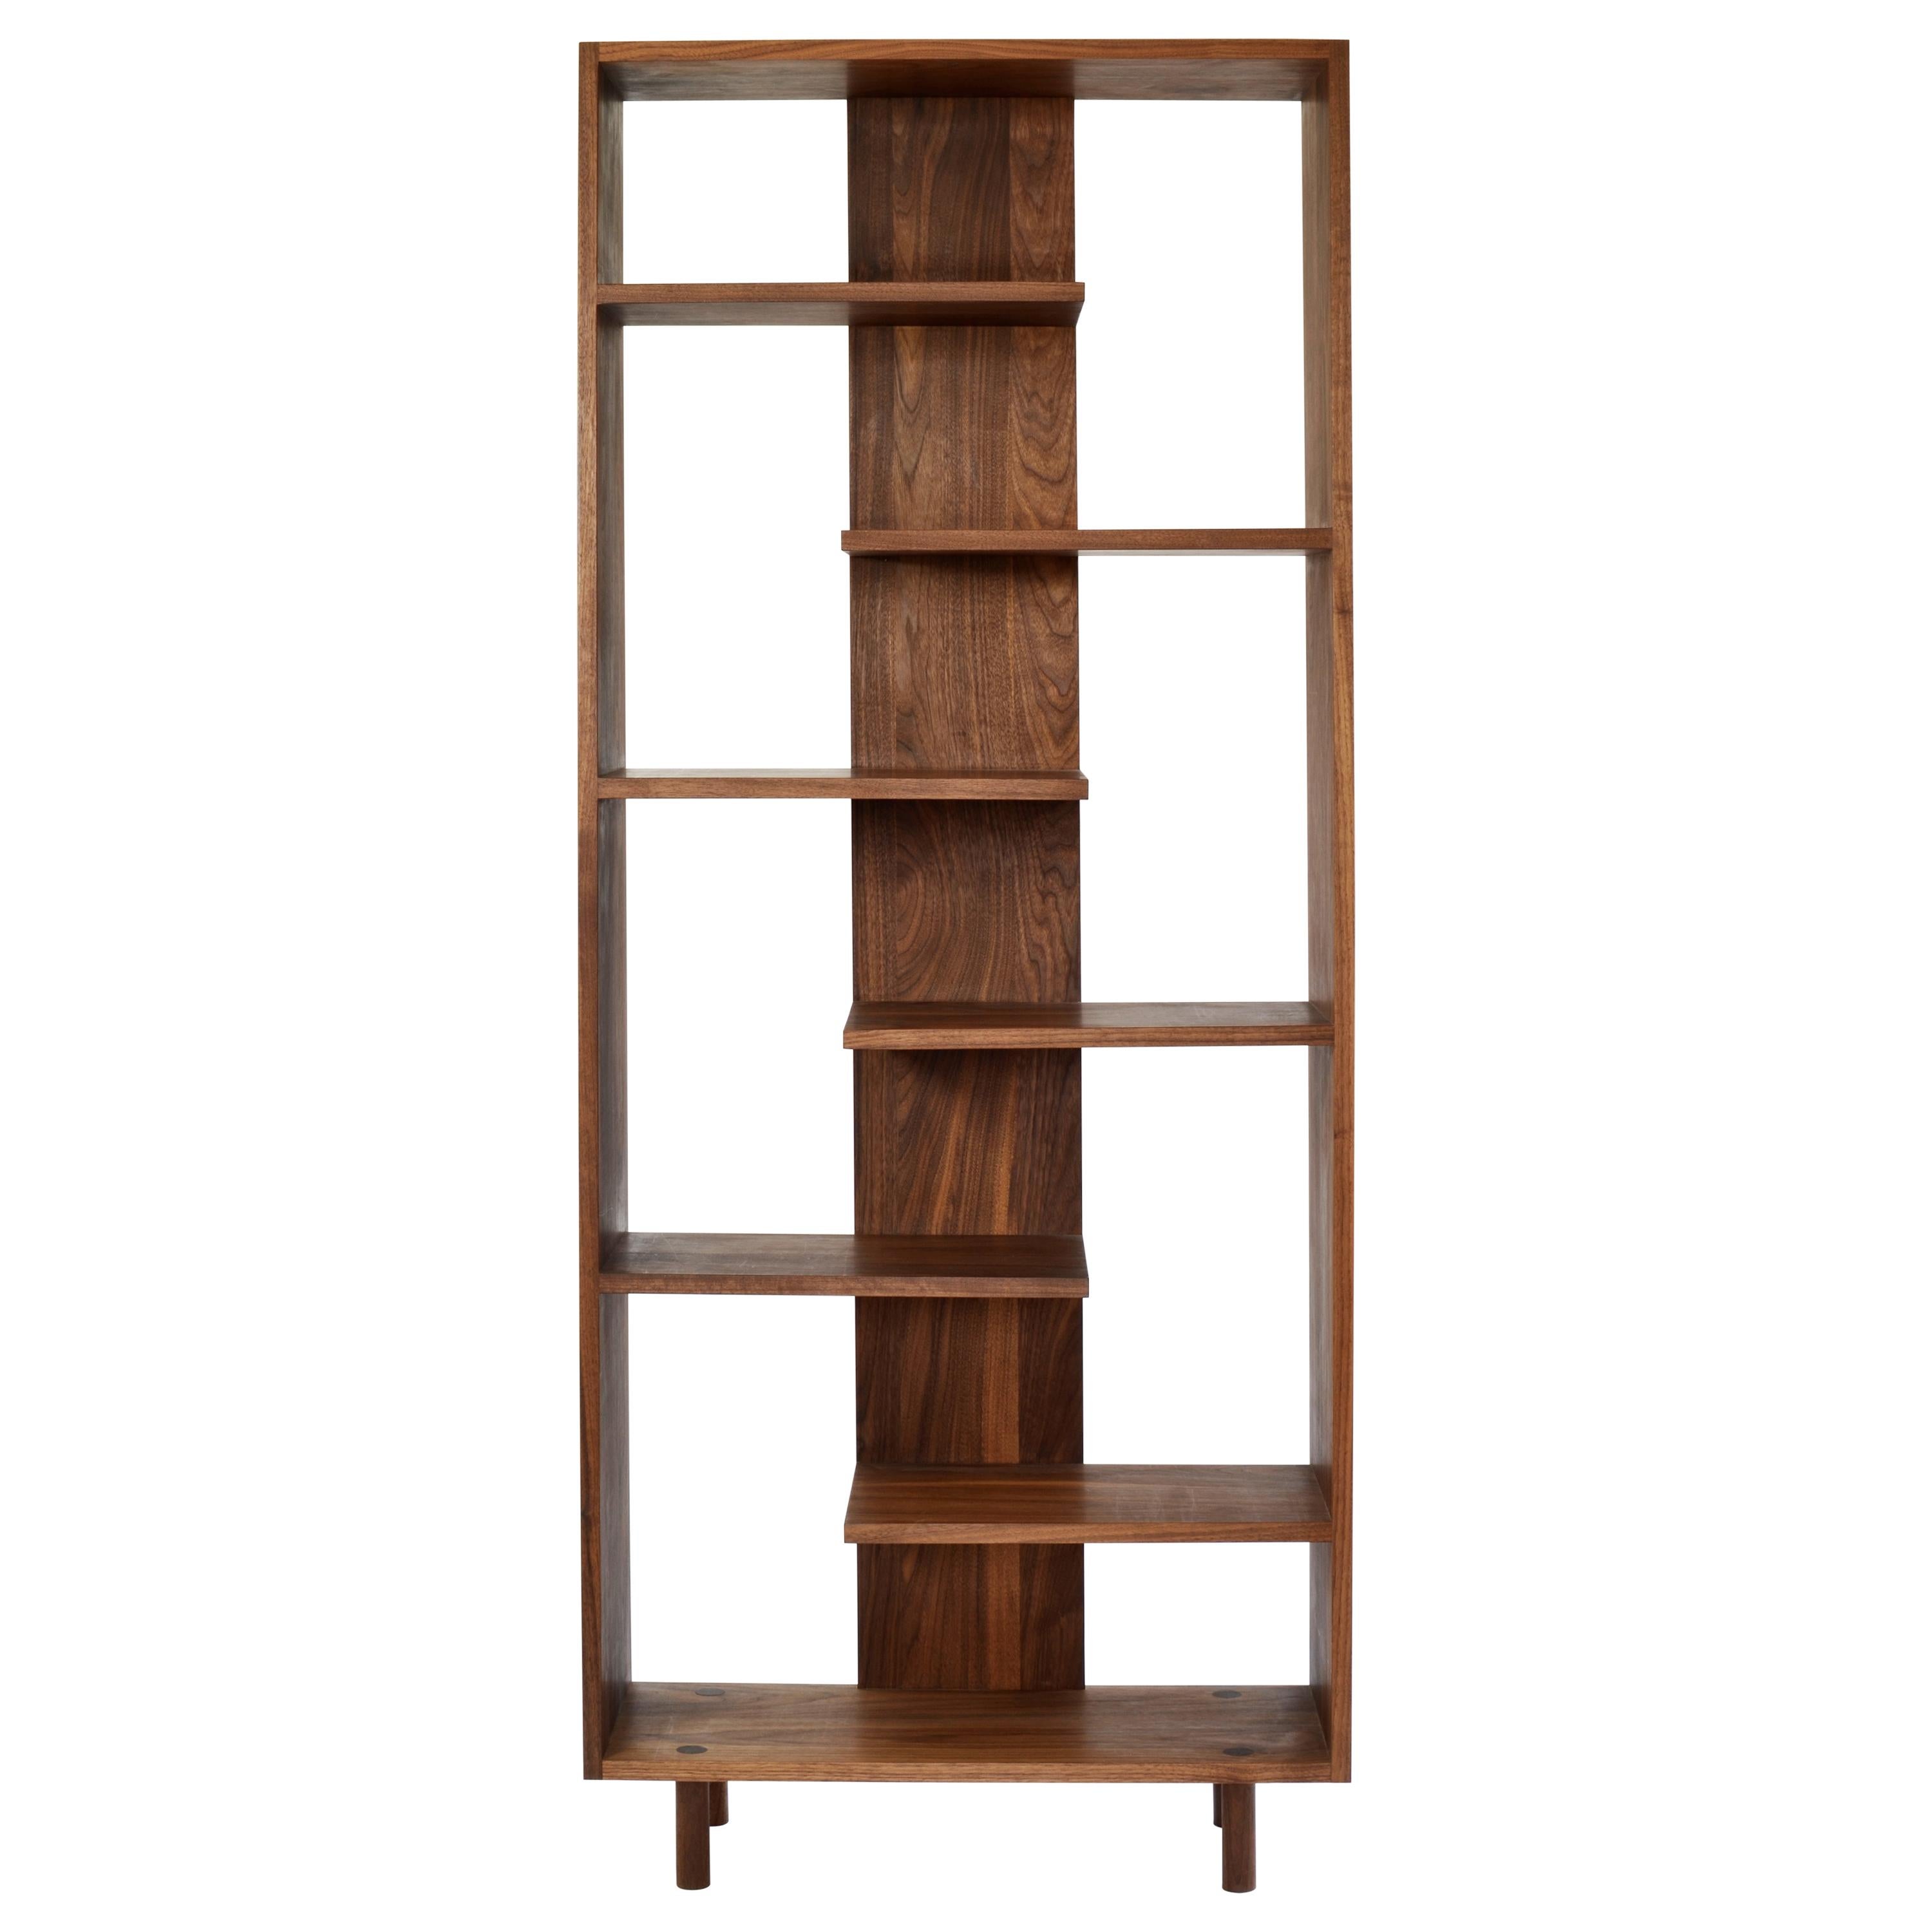 North American Mirrored Pair Contemporary Shelving 